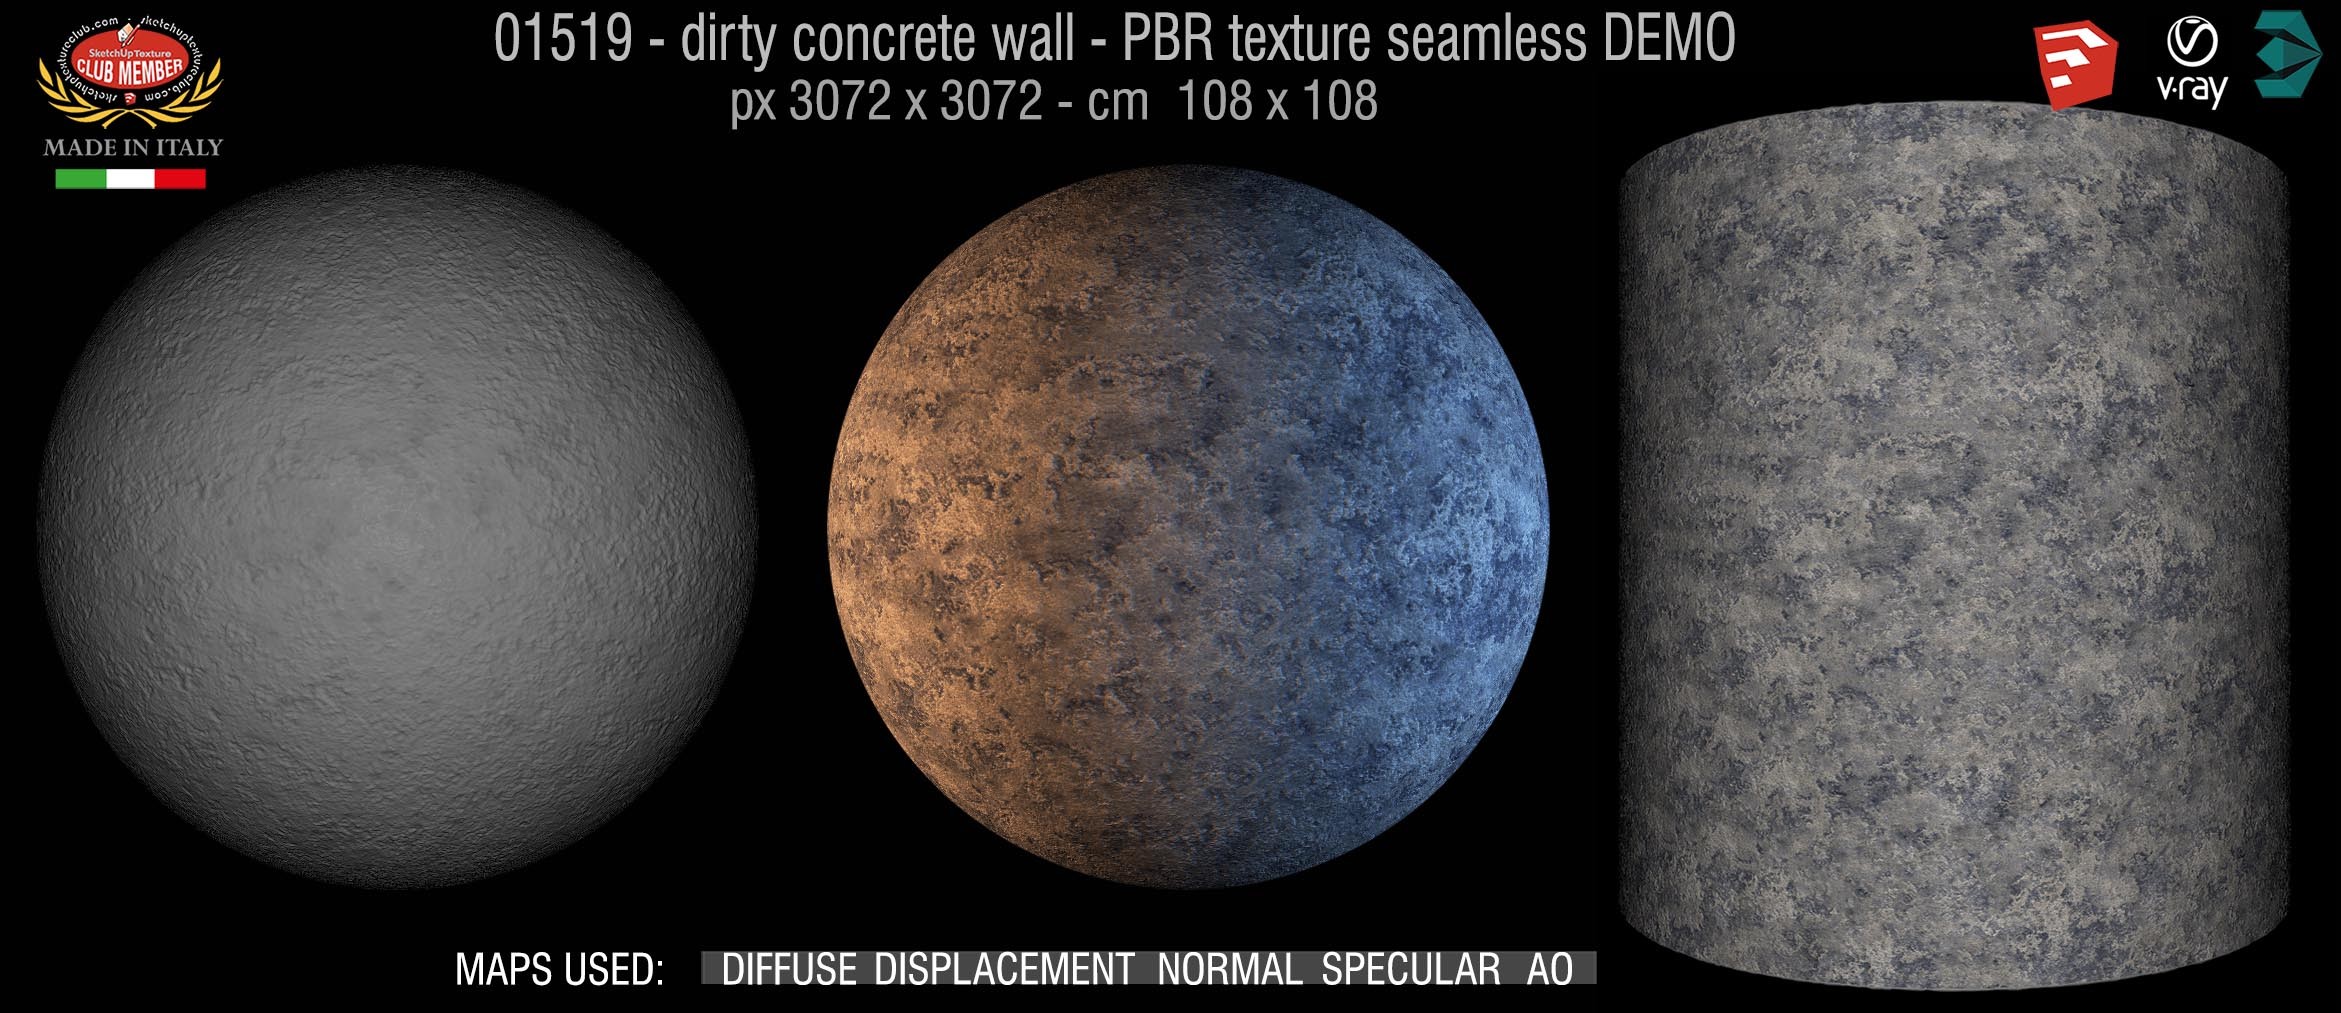 01519 Concrete bare dirty wall PBR texture seamless DEMO